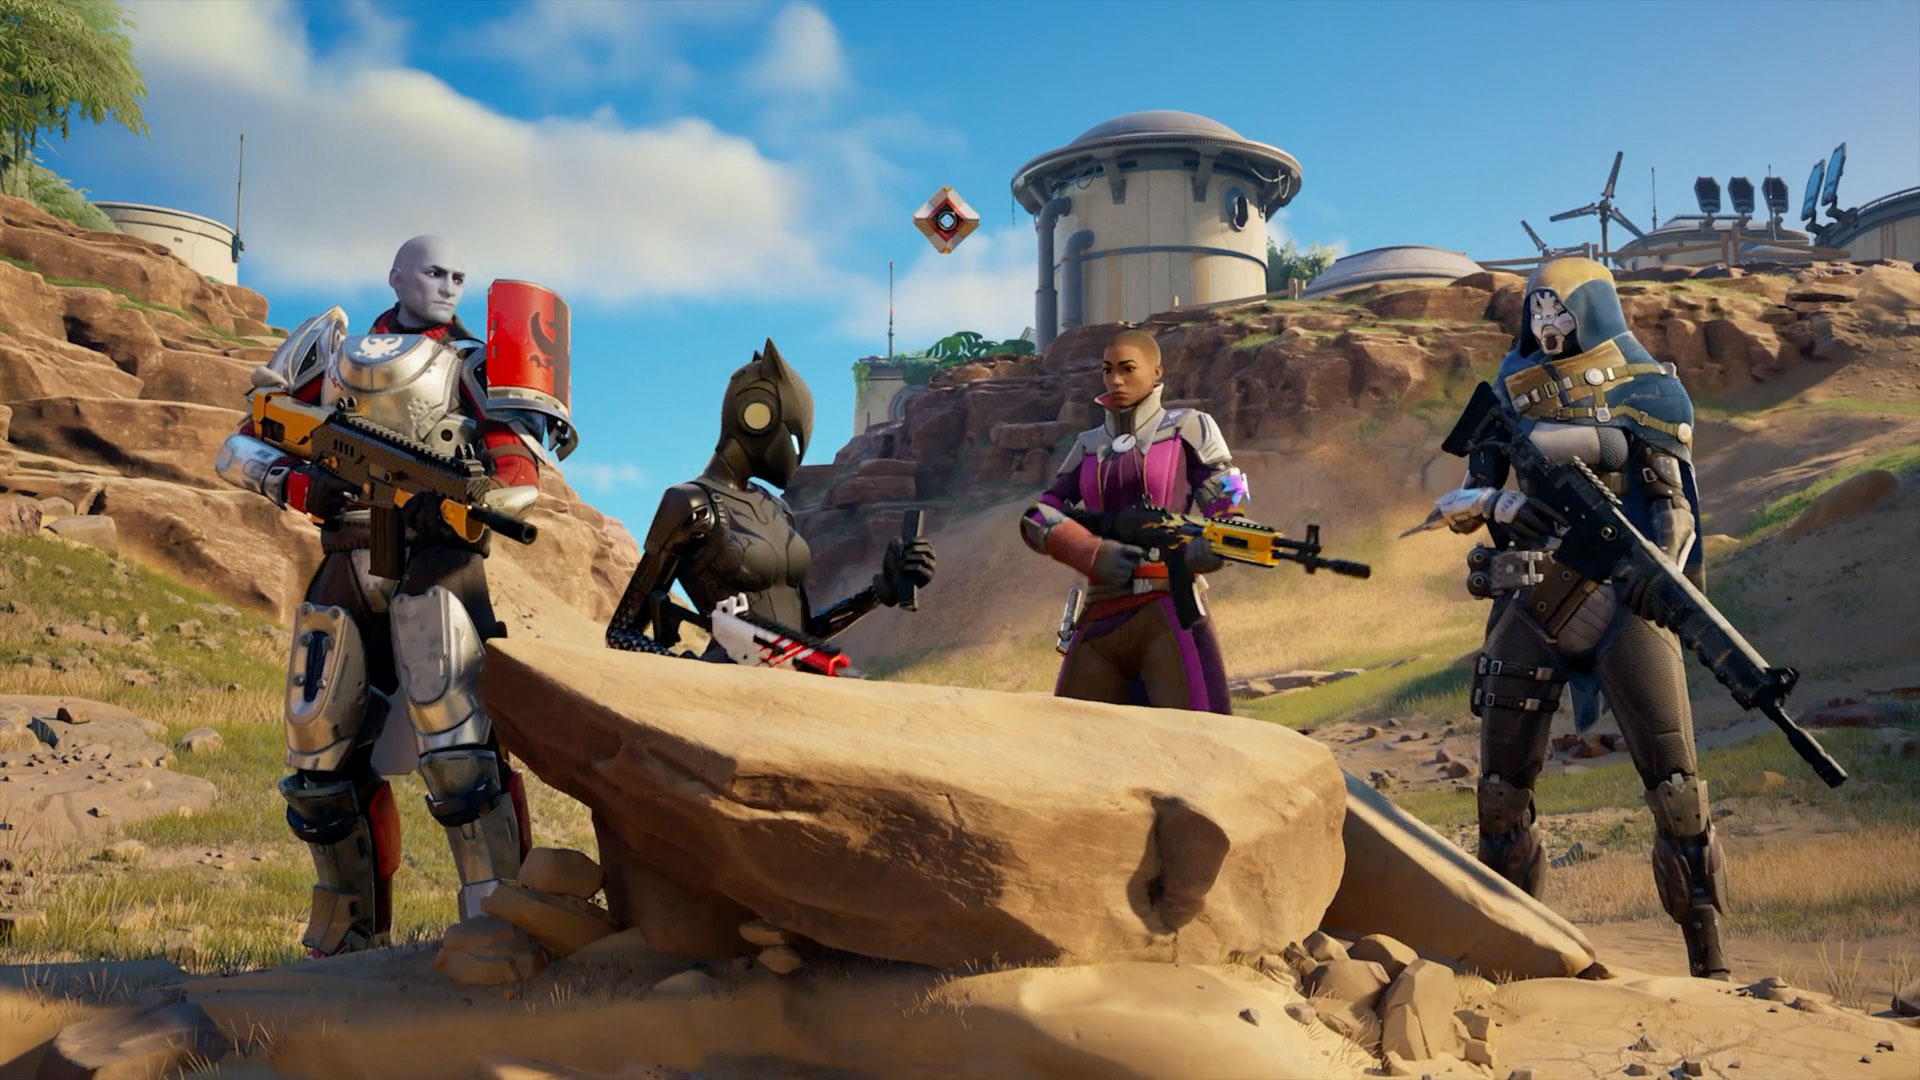 GamesRadar News you need to know about Destiny in Fortnite